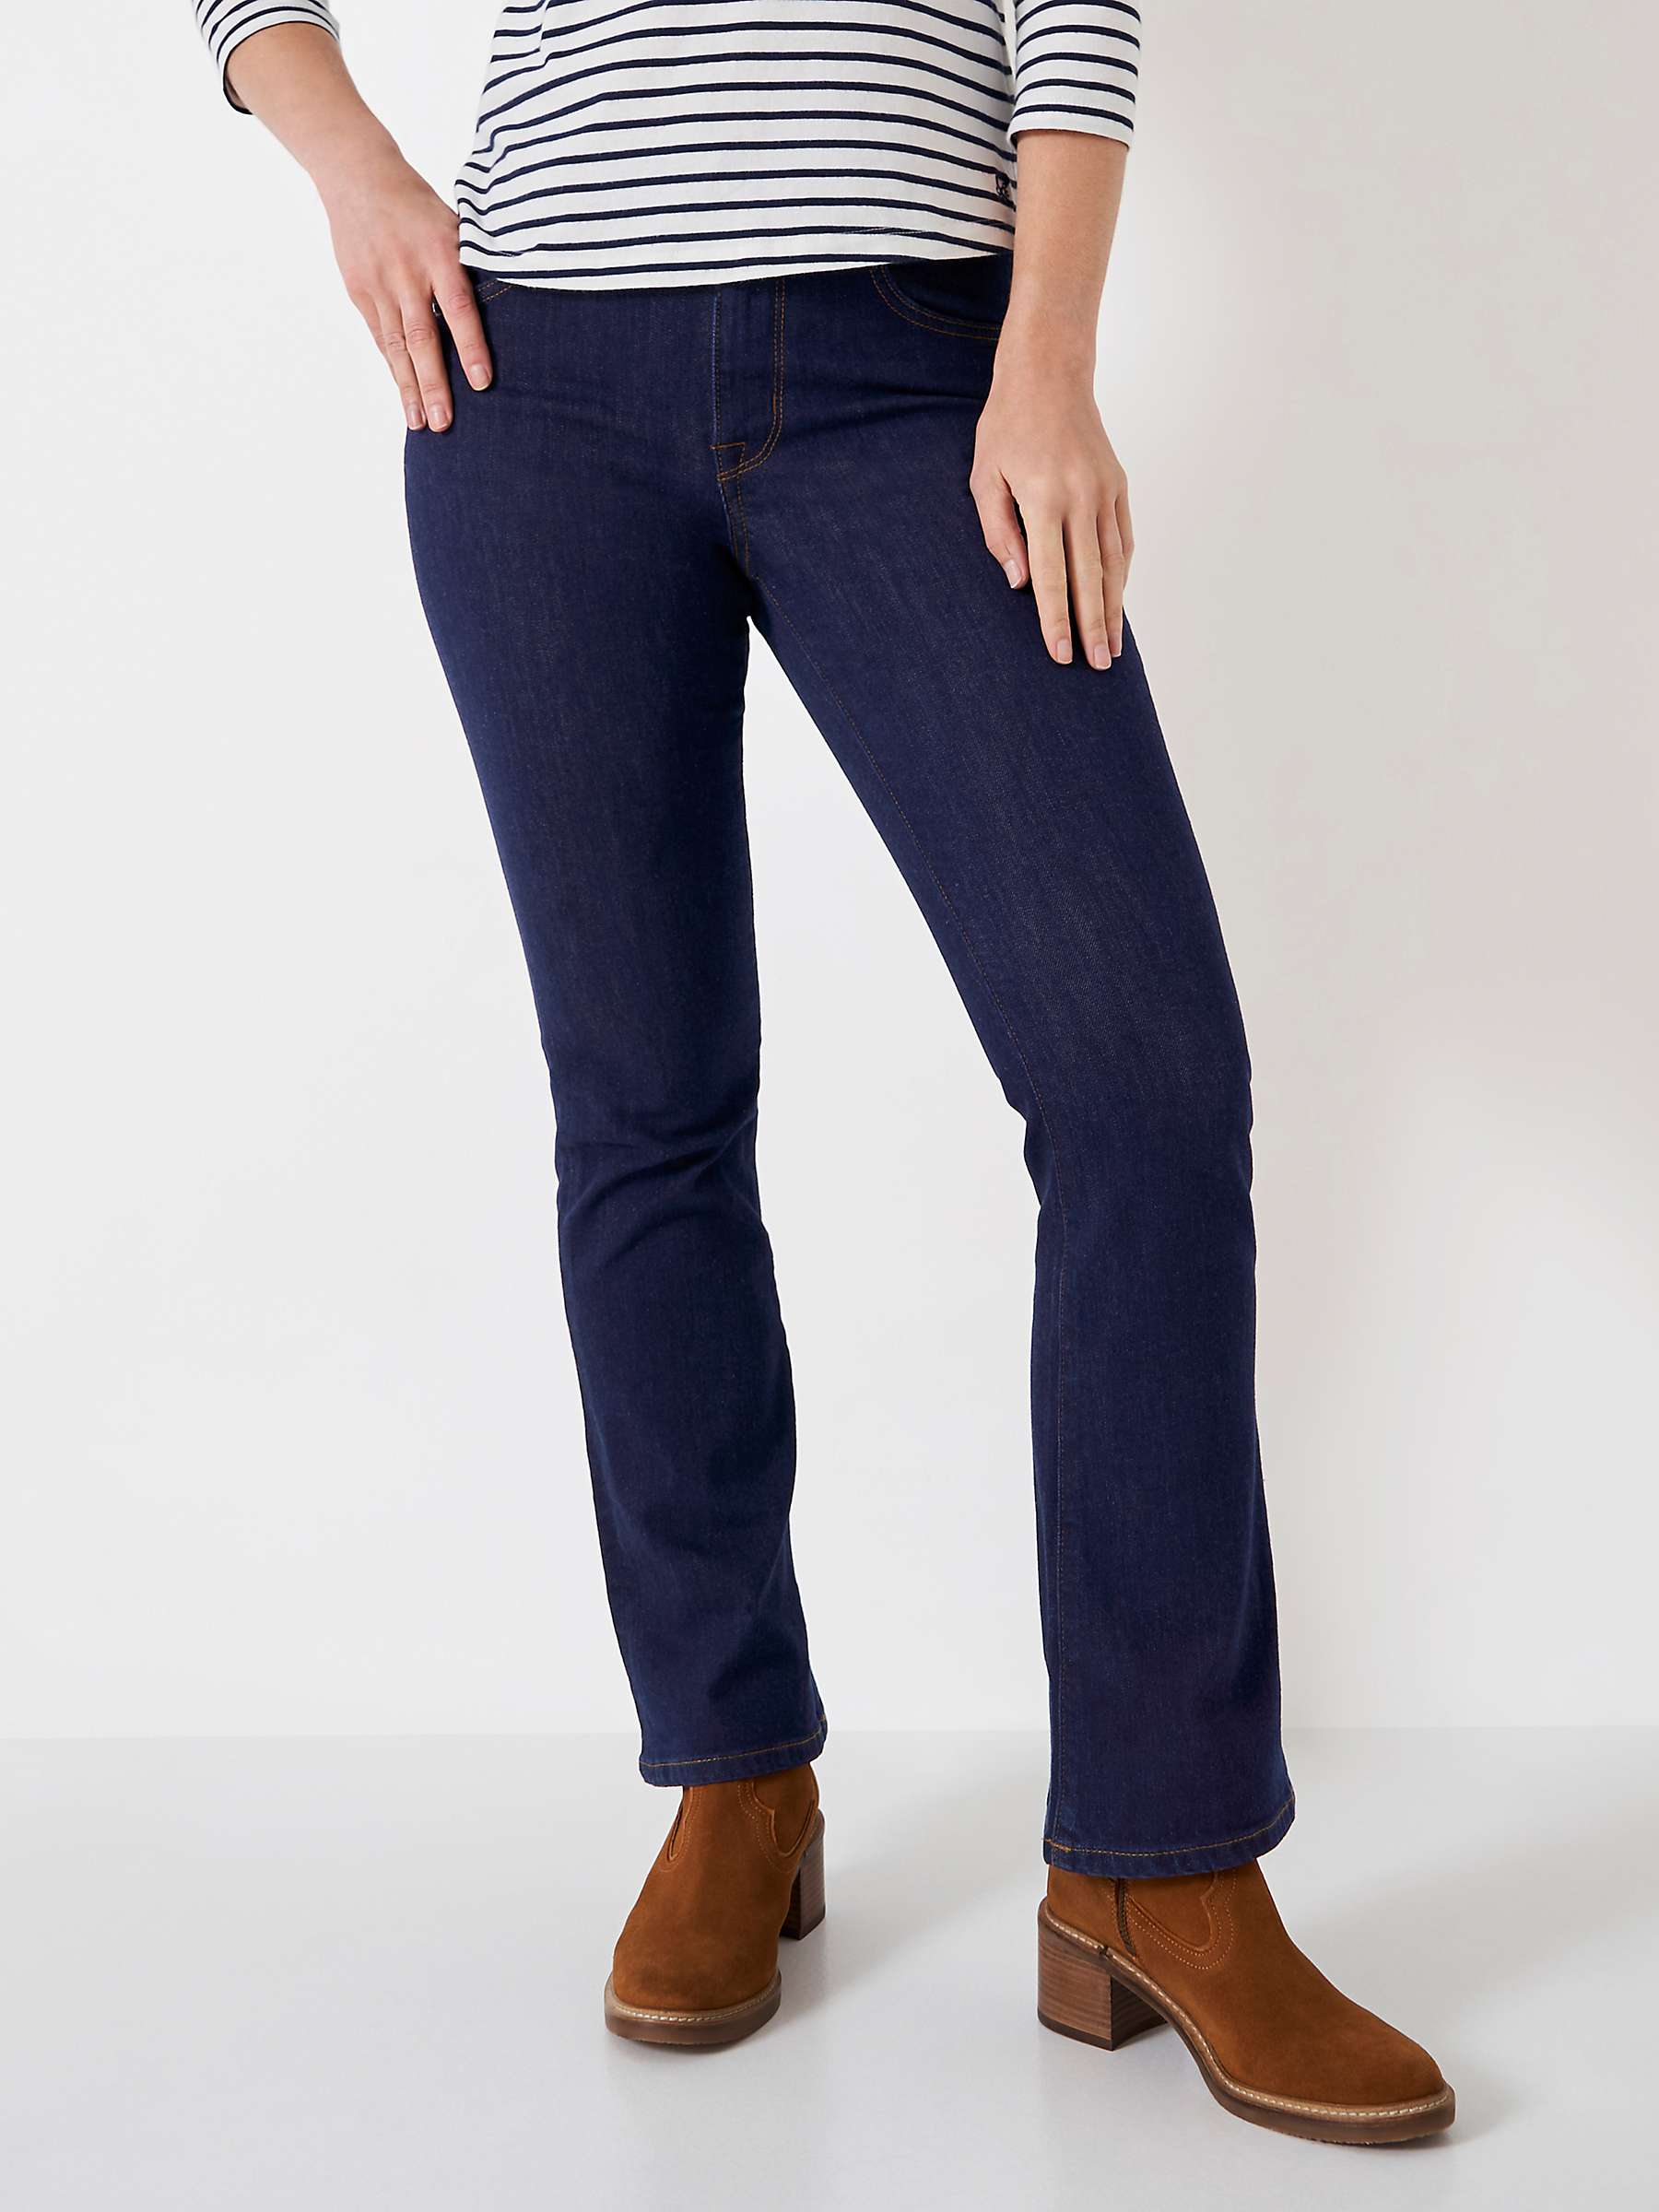 Buy Crew Clothing Bootcut Jeans, Blue Online at johnlewis.com